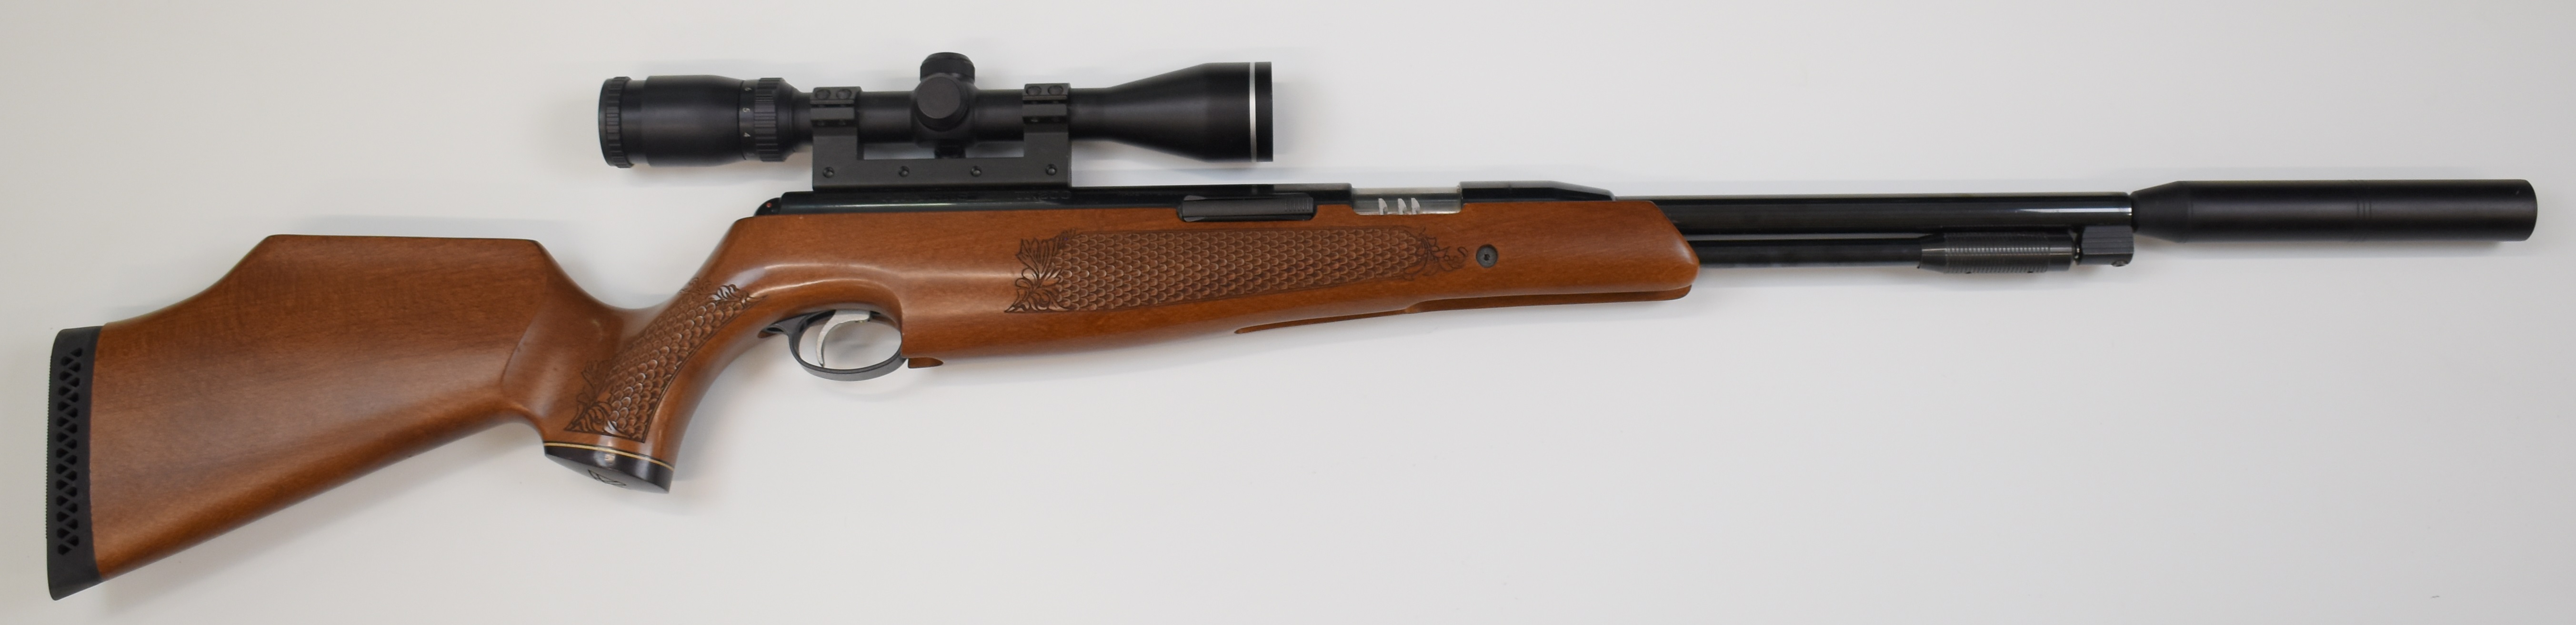 Air Arms TX200 .22 under-lever air rifle with carved semi-pistol grip and forend, adjustable - Image 2 of 11